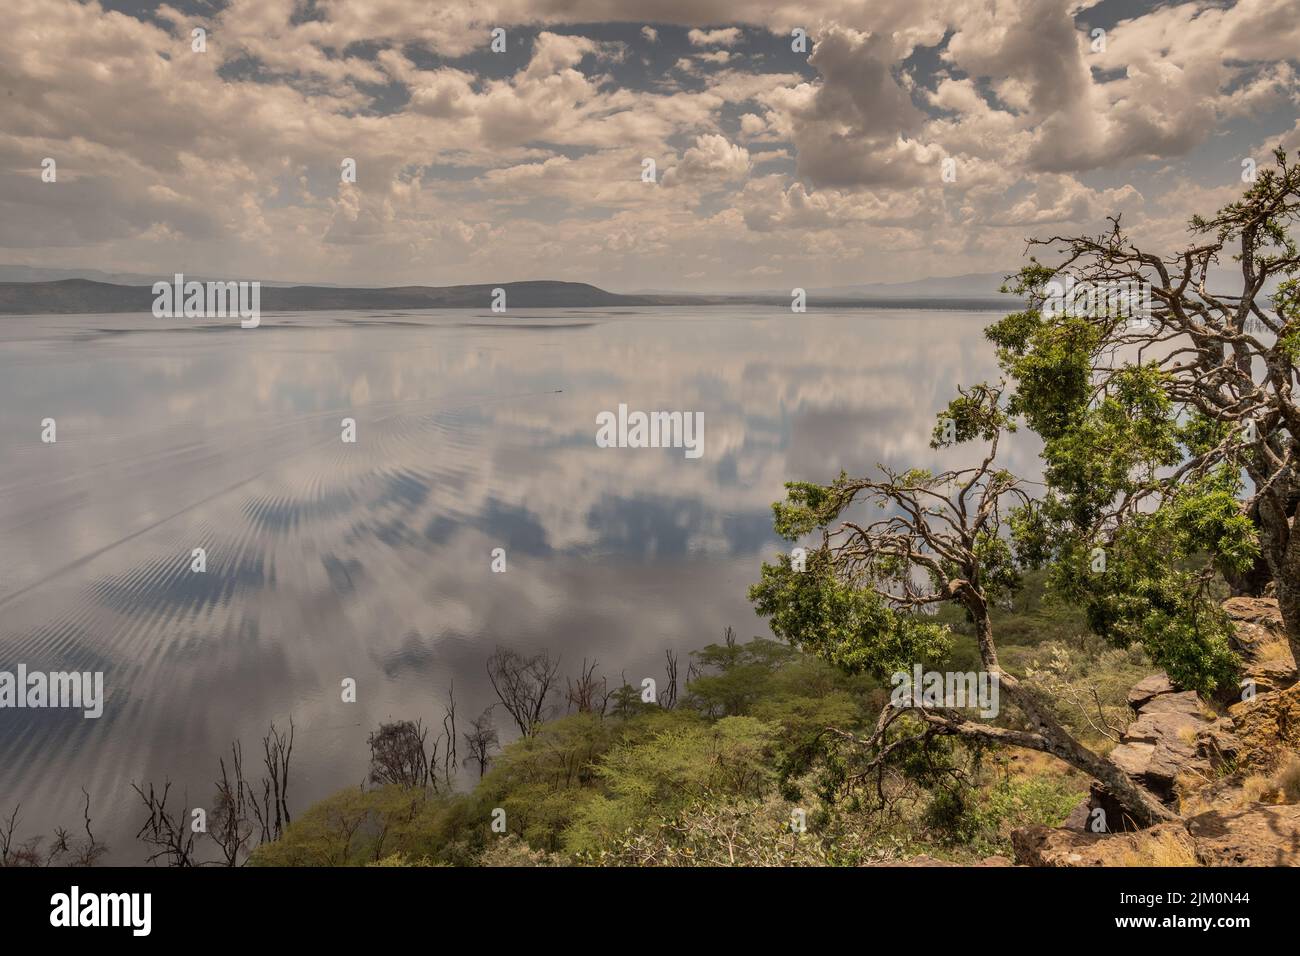 Lake Nakuru National Park, Kenya, Africa. The water level of the lake has risen a lot in recent years for geological reasons. Stock Photo